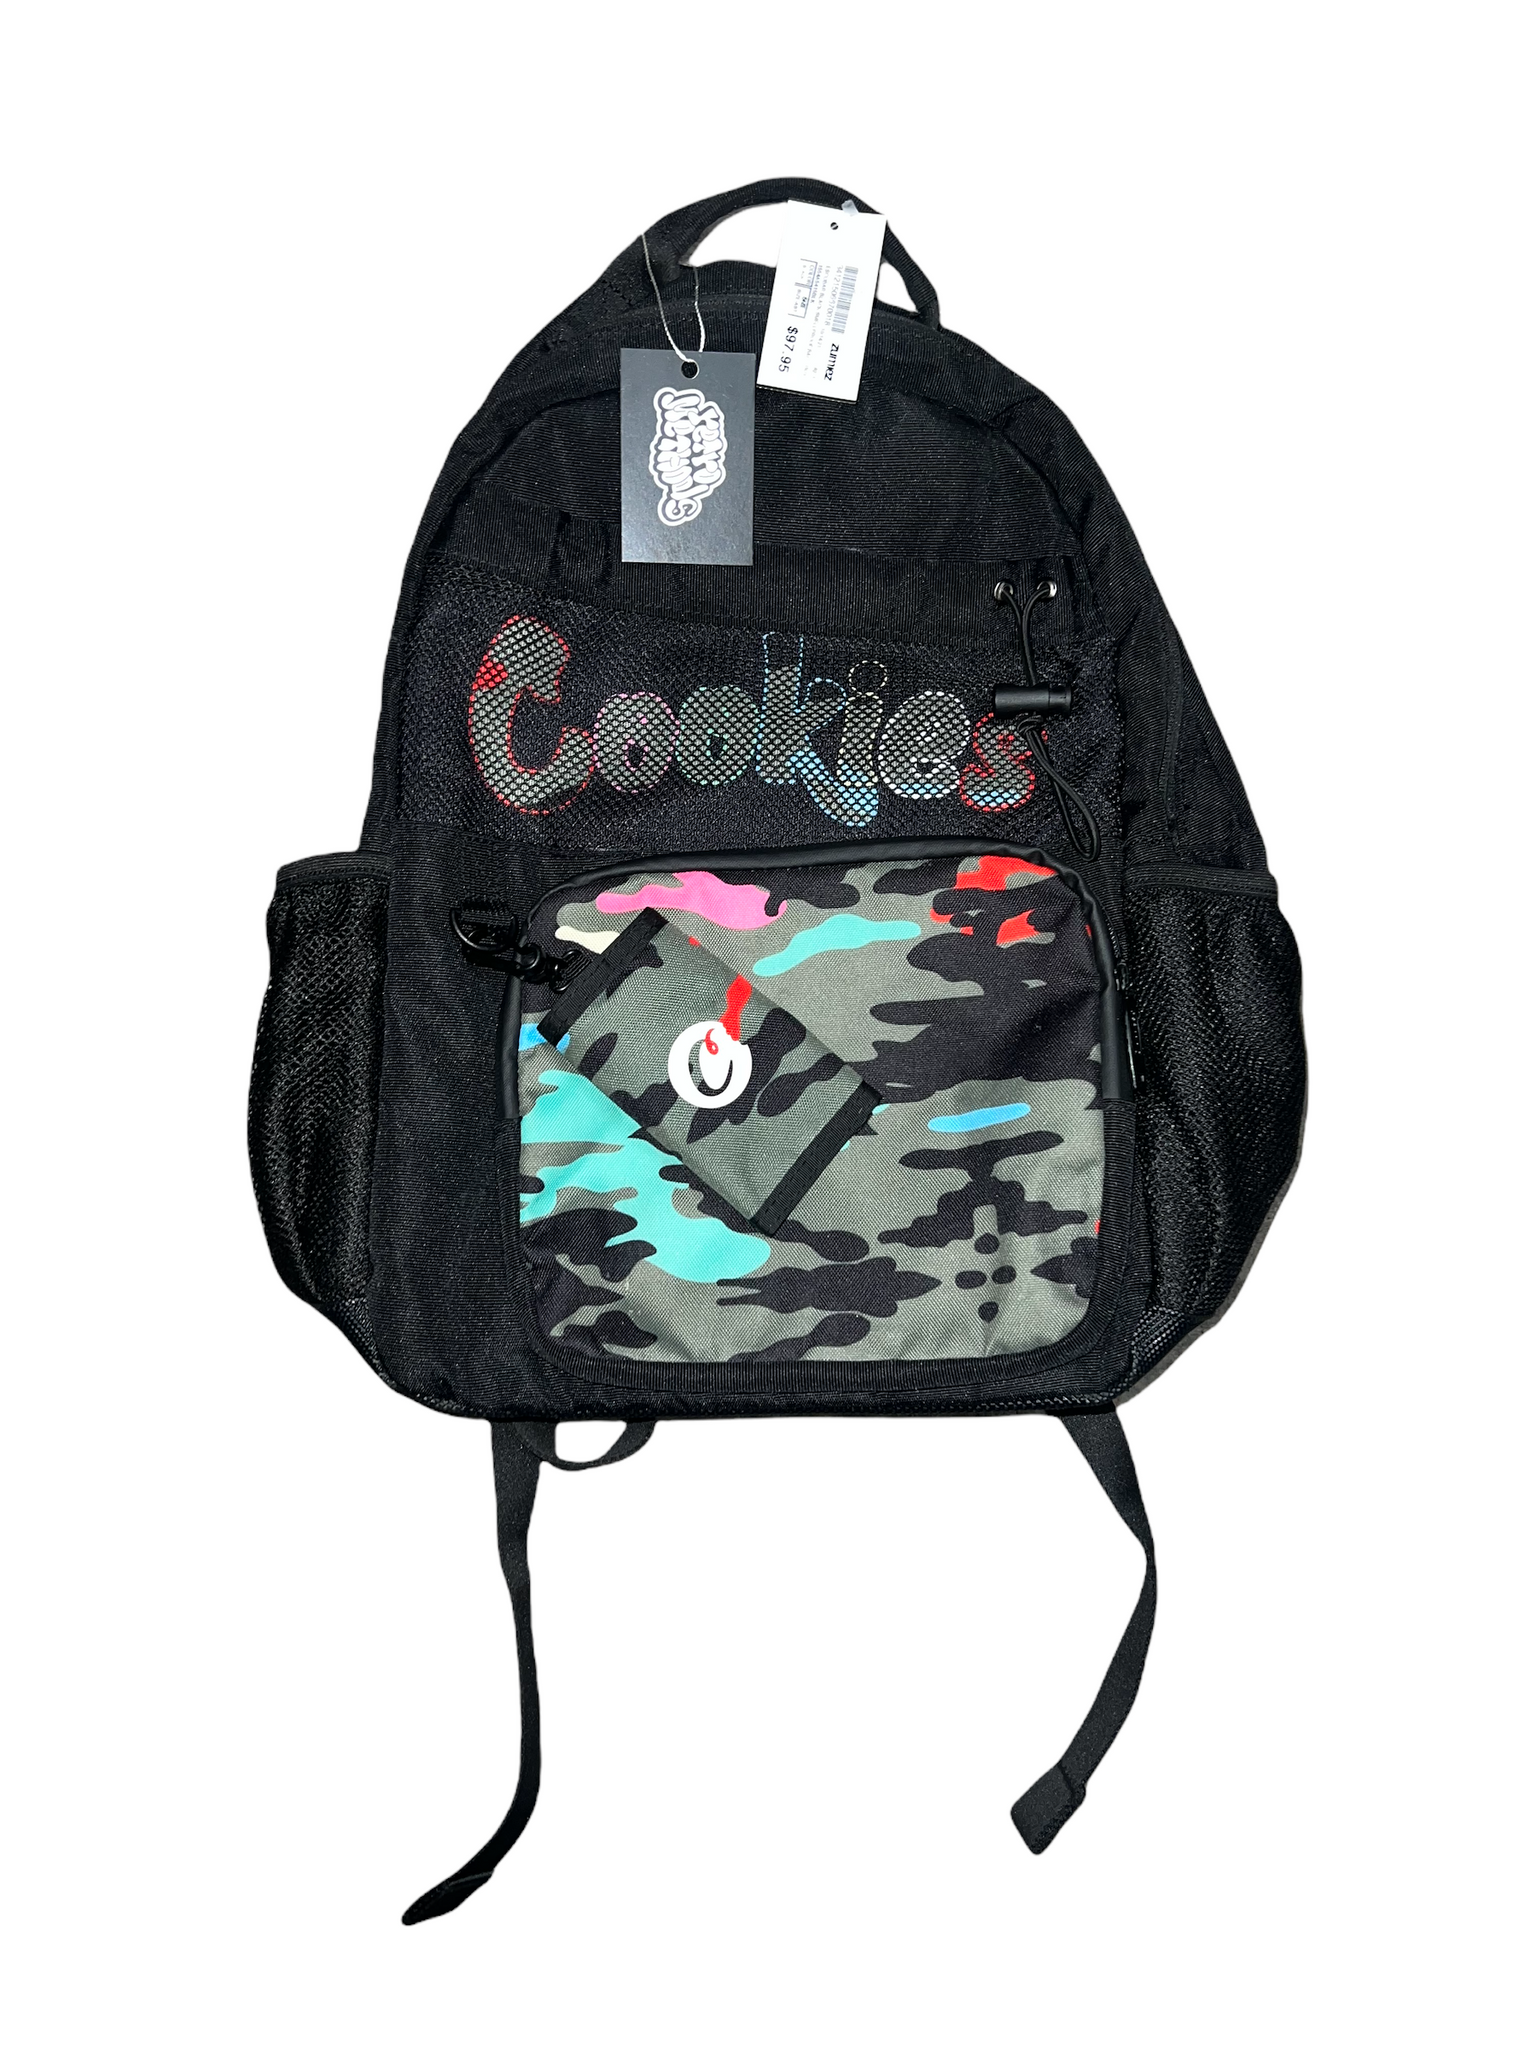 Cookies Escobar Smell Proof Black Camo Backpack